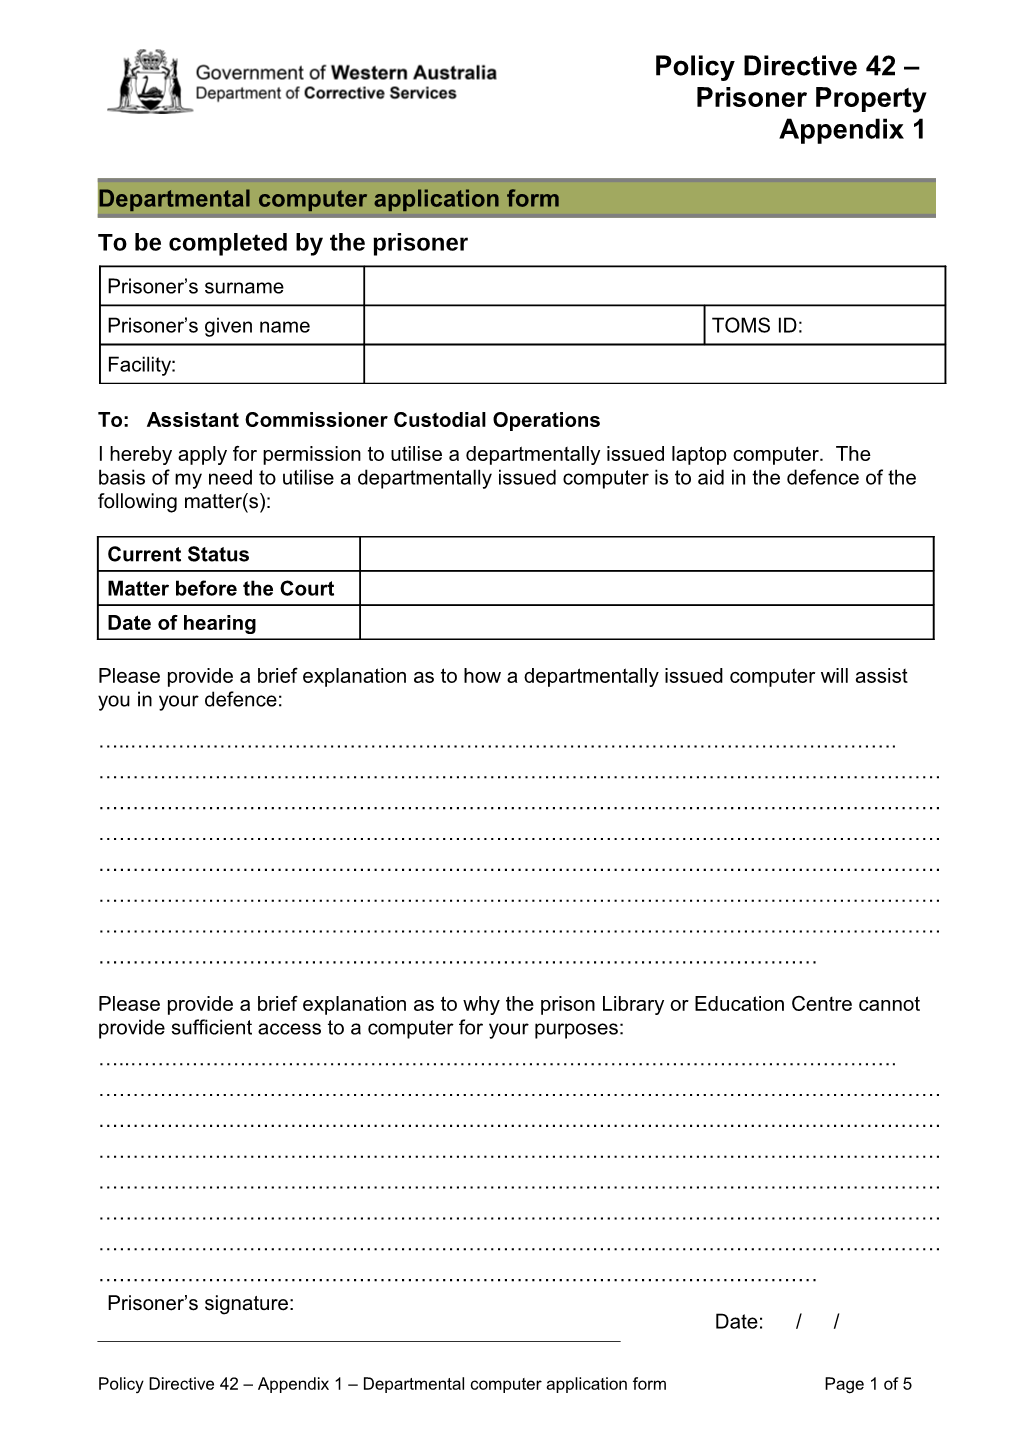 Policy Directive 42 Appendix 1 Departmental Computer Application Form